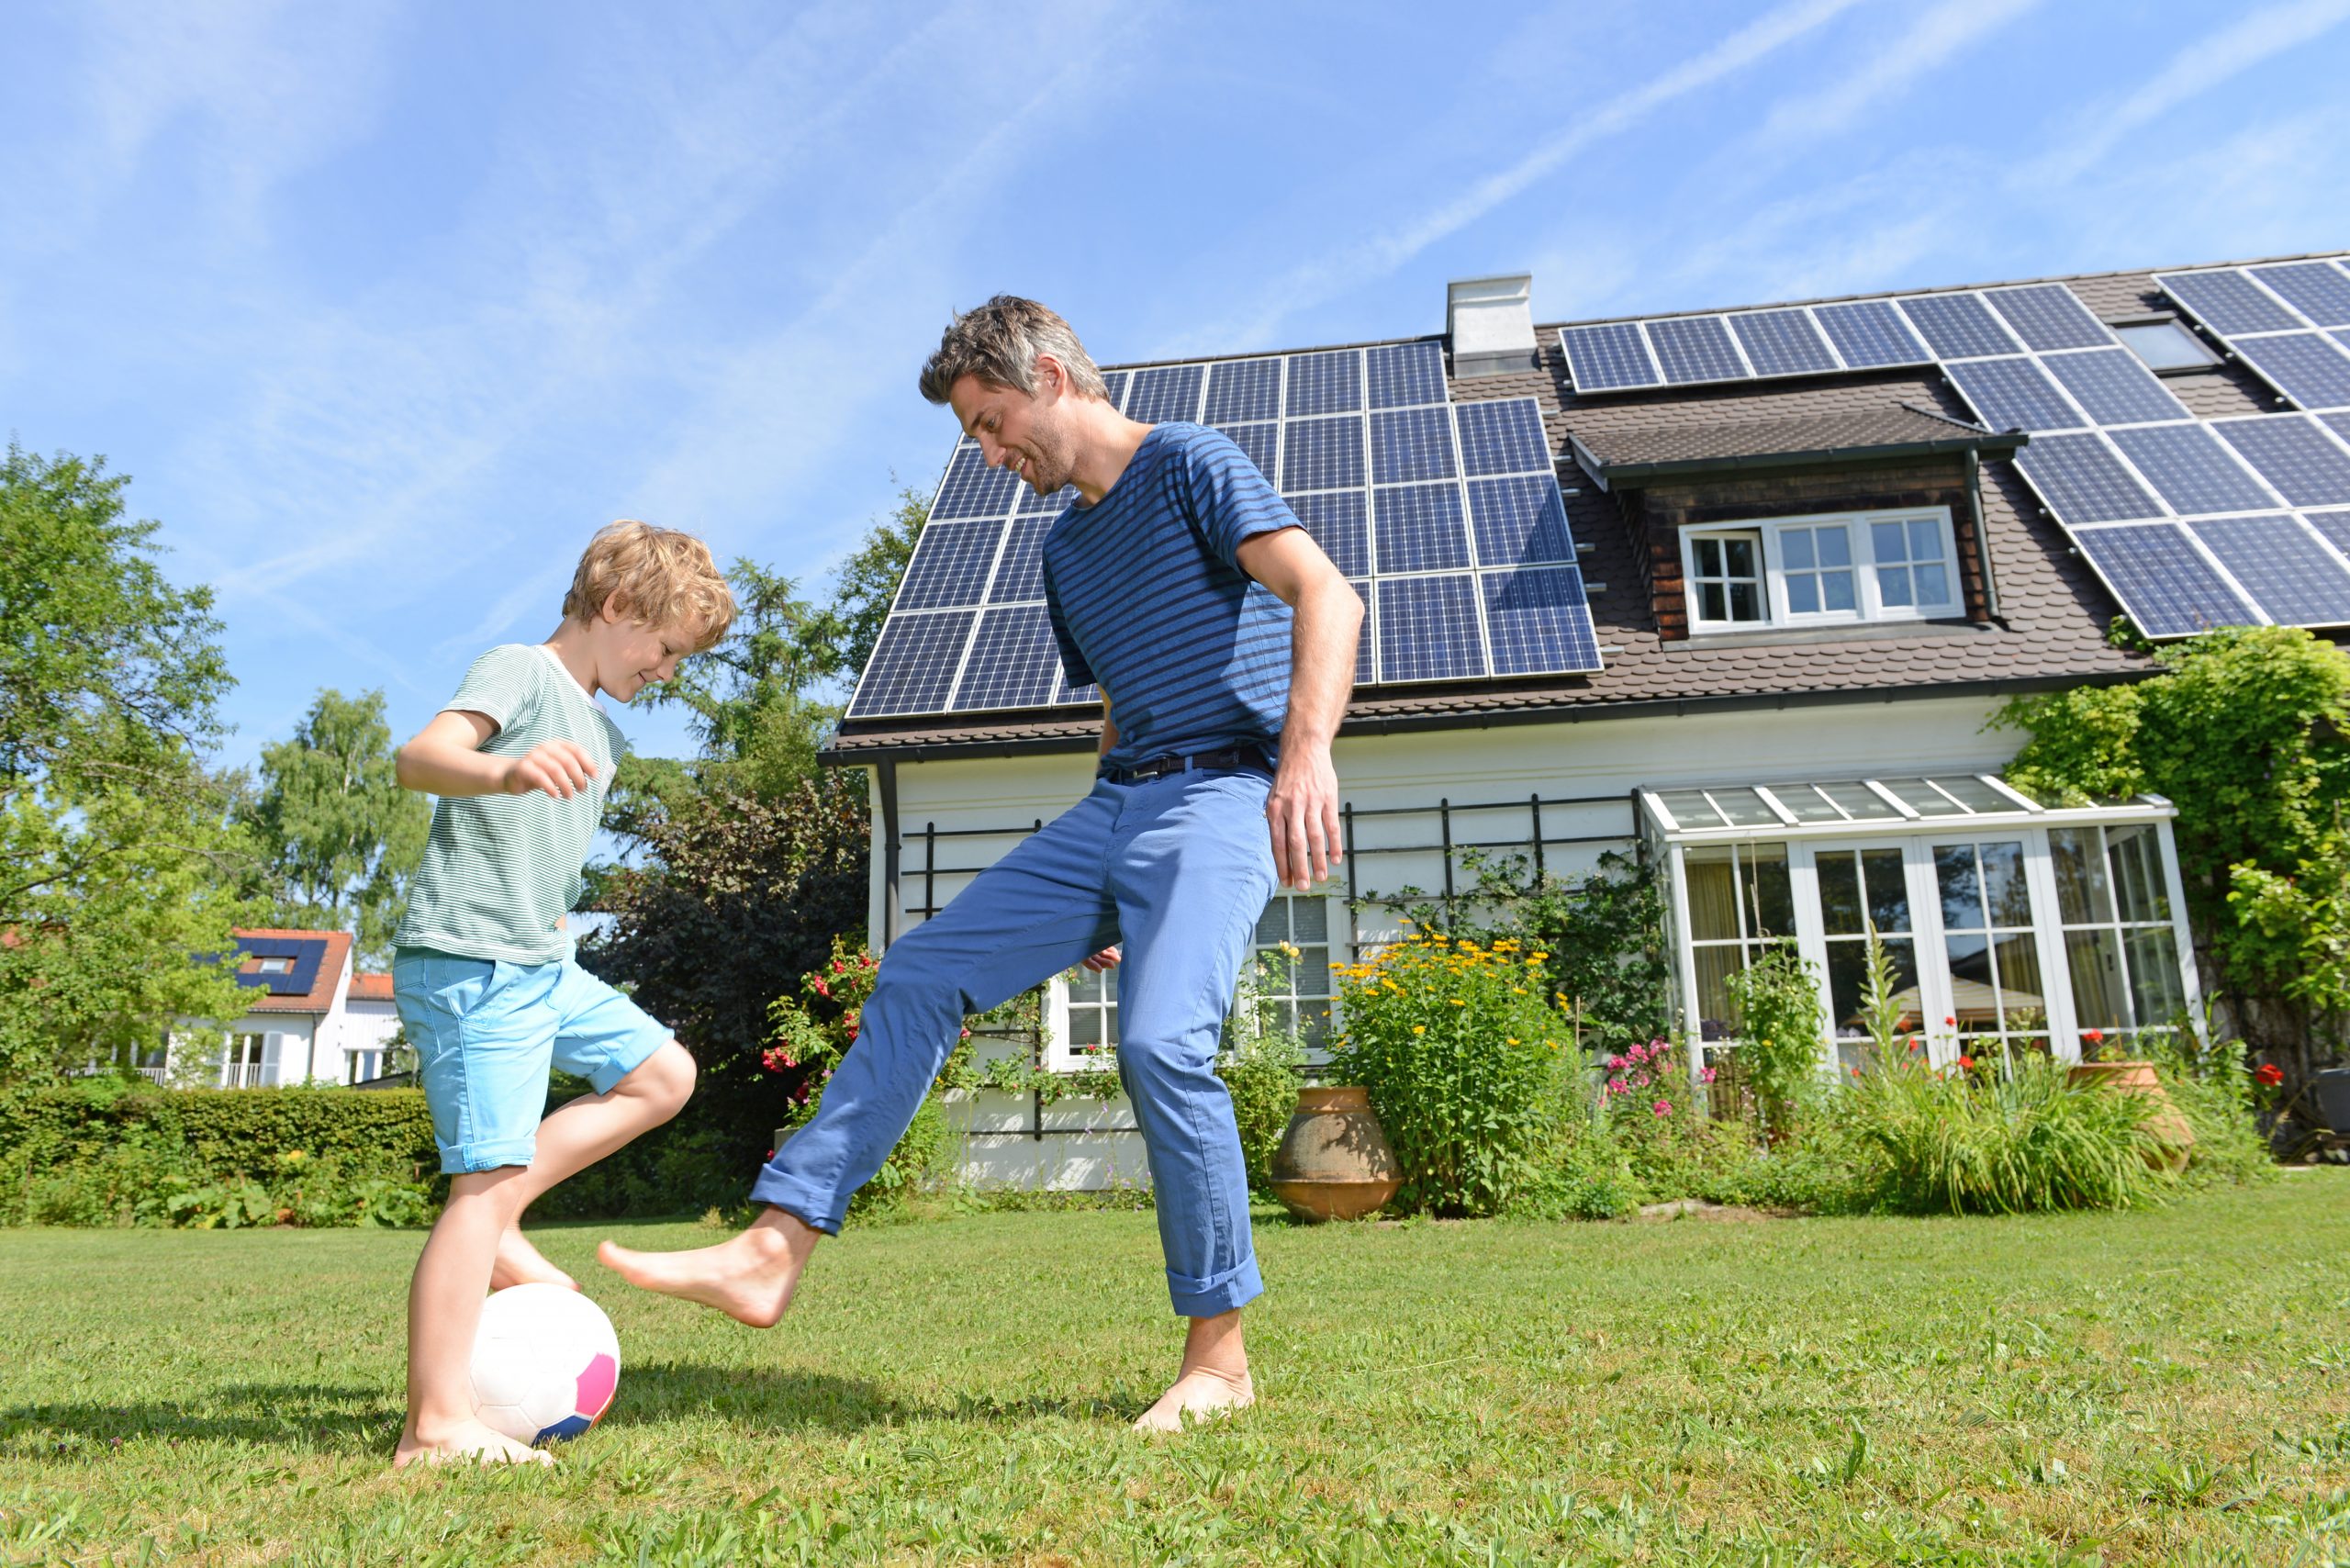 Father and son playing soccer on a sunny day with home with solar panels on roof in the background.